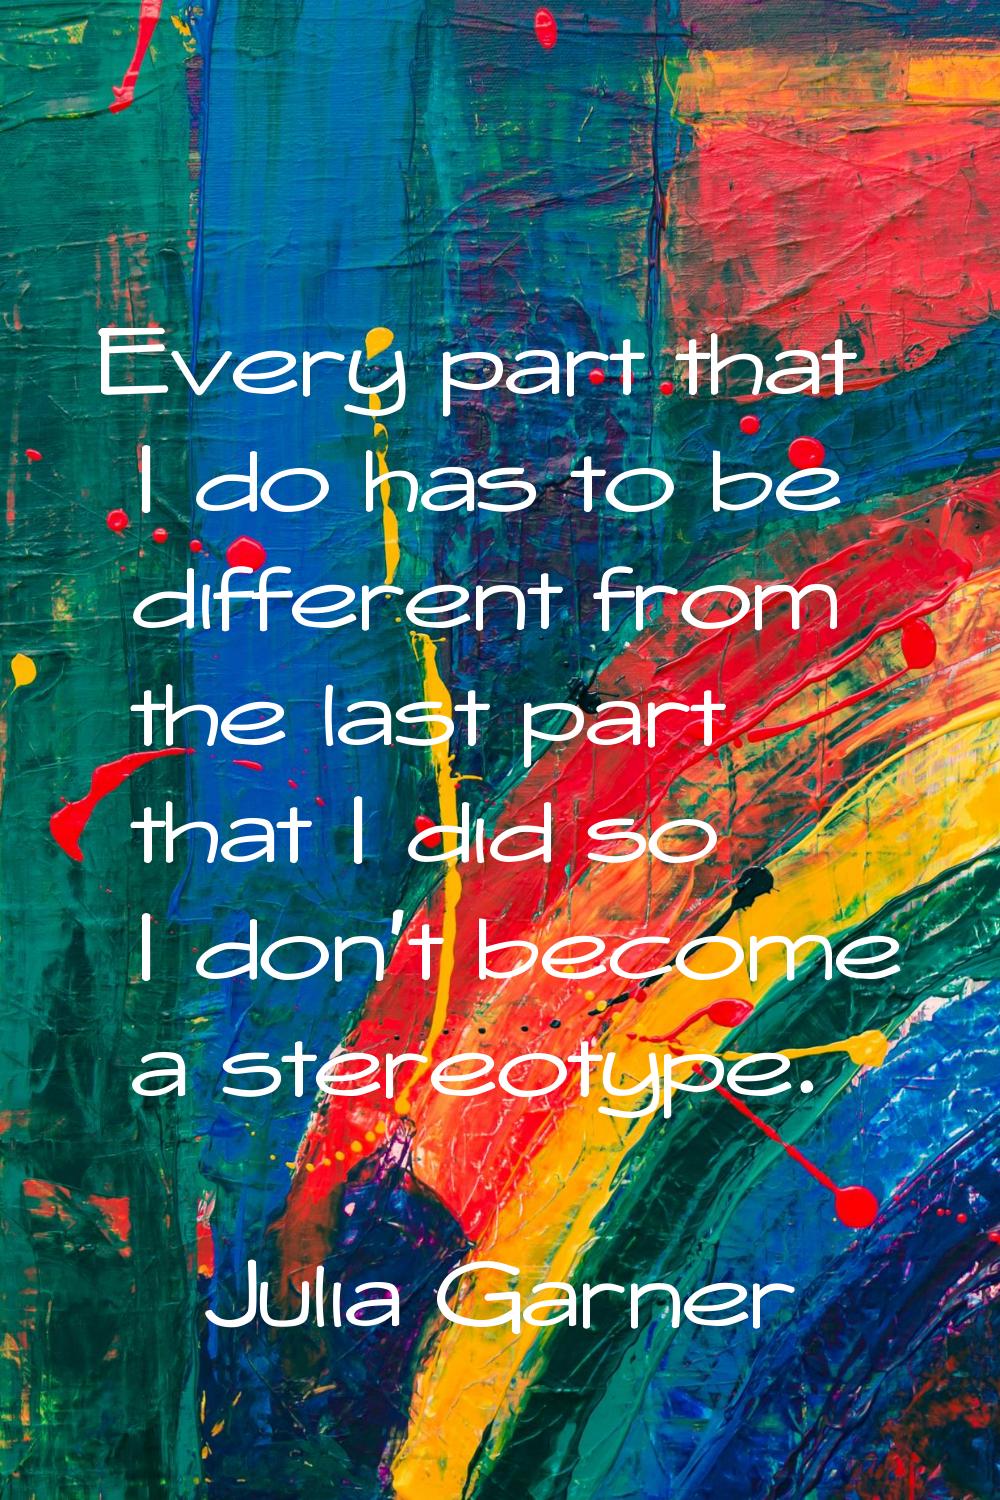 Every part that I do has to be different from the last part that I did so I don't become a stereoty